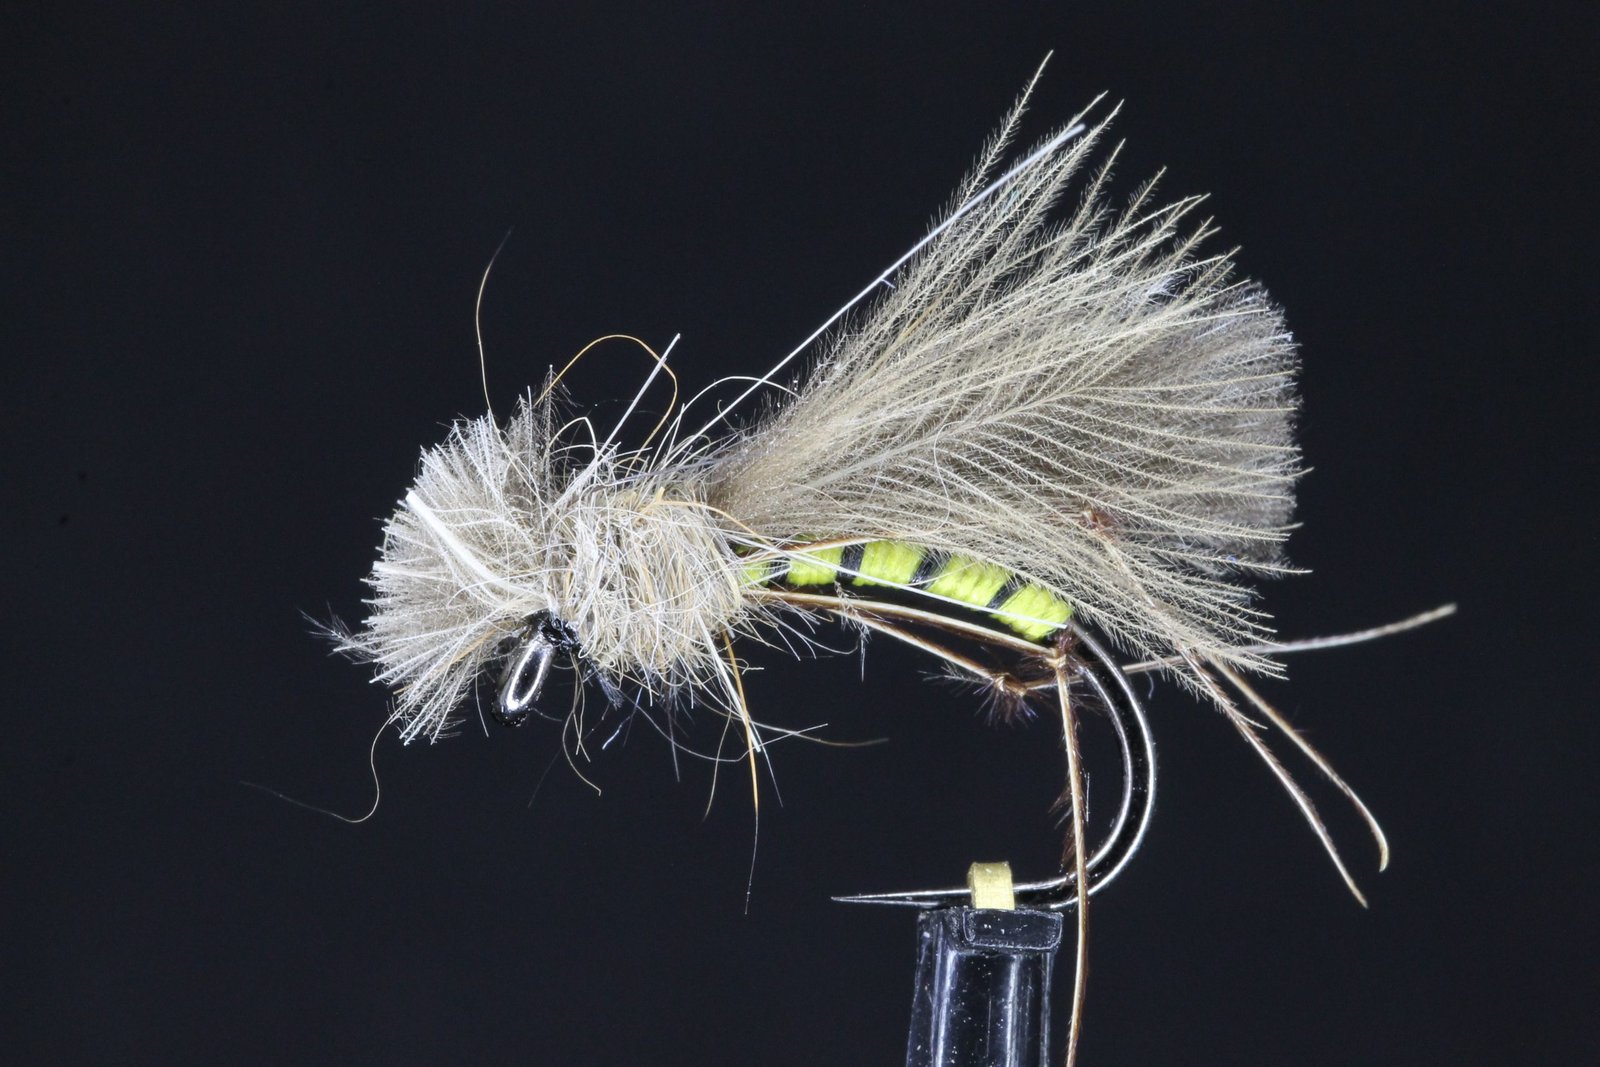 3 No trout fly Ref BL07 size 12 BARBLESS Yellow Owl CDC